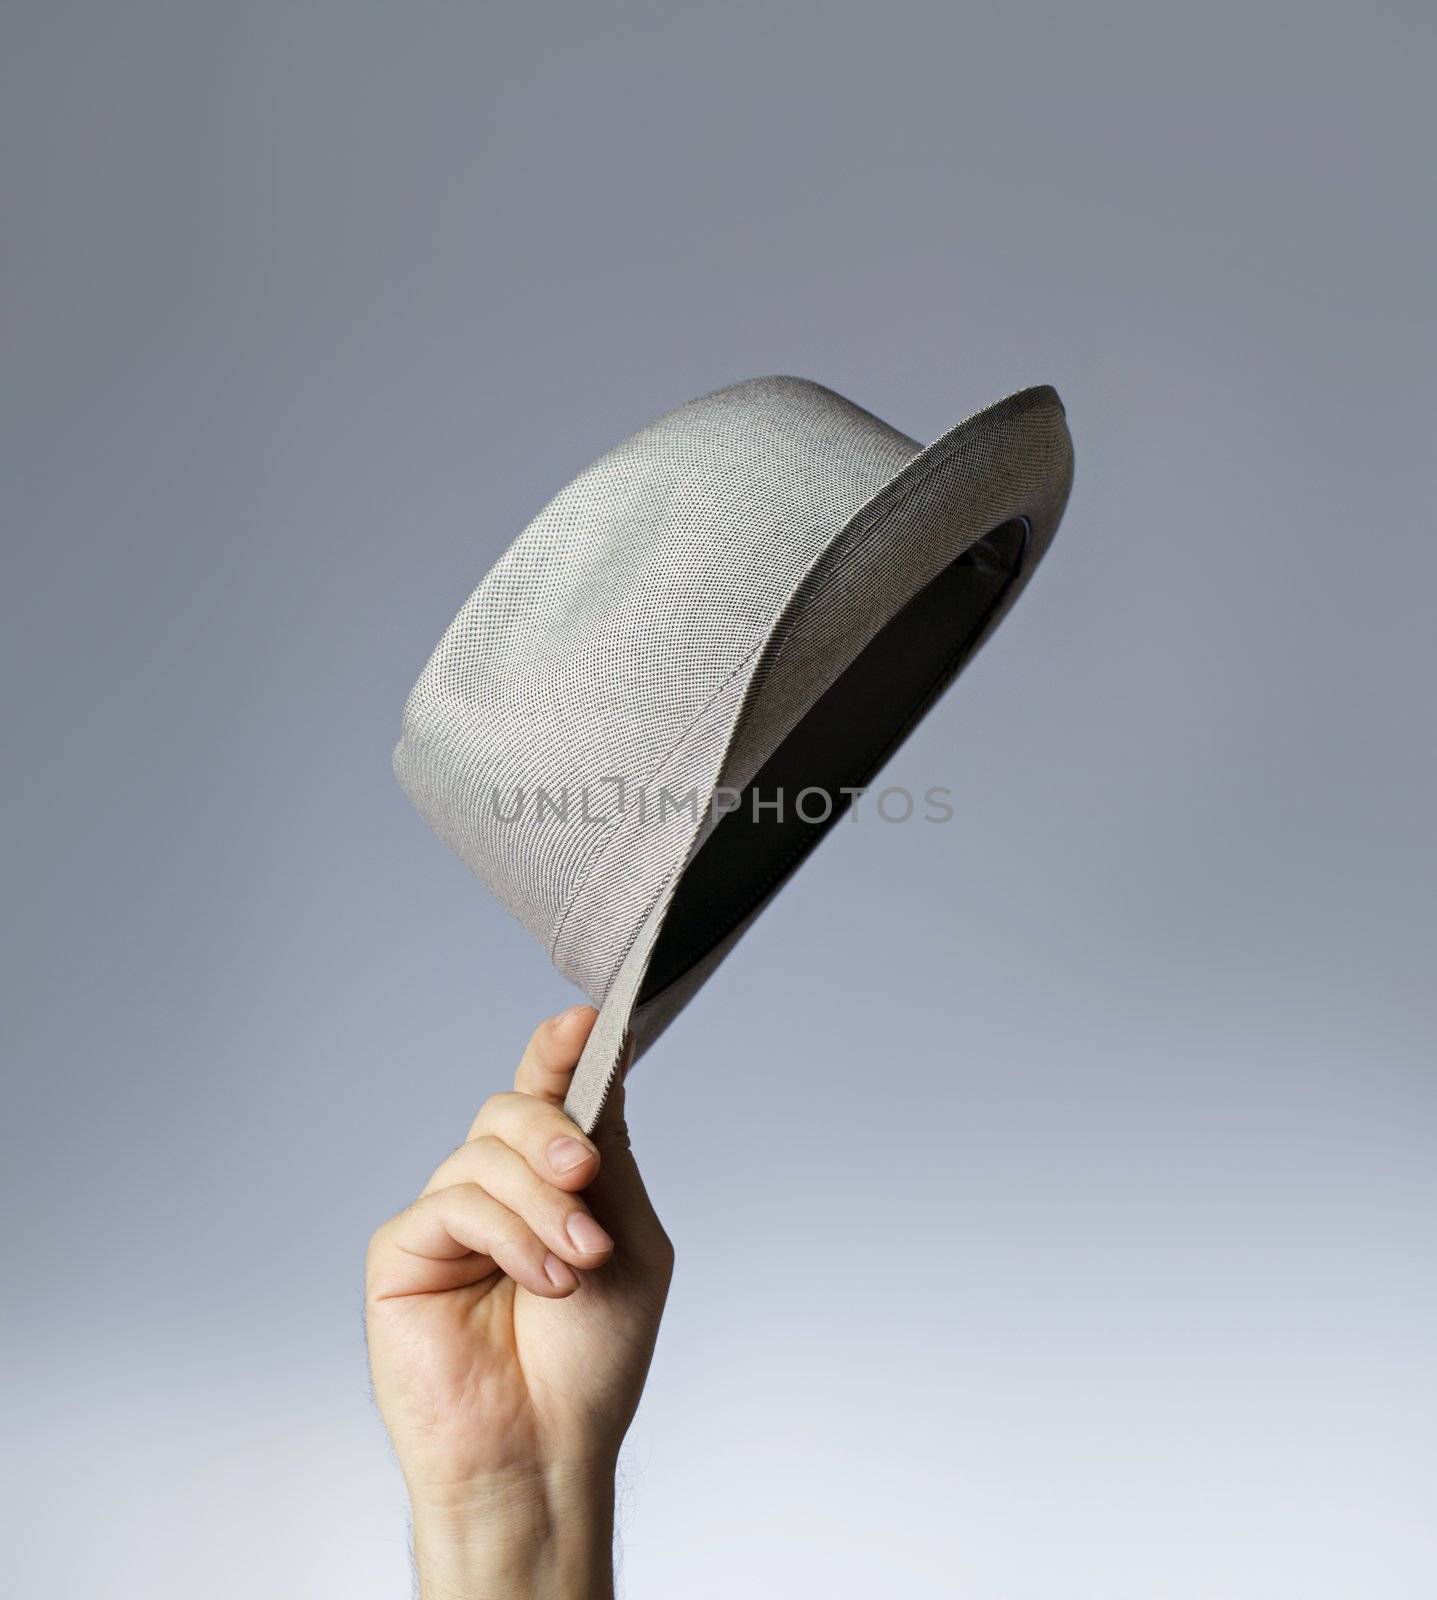 Hat by Stocksnapper